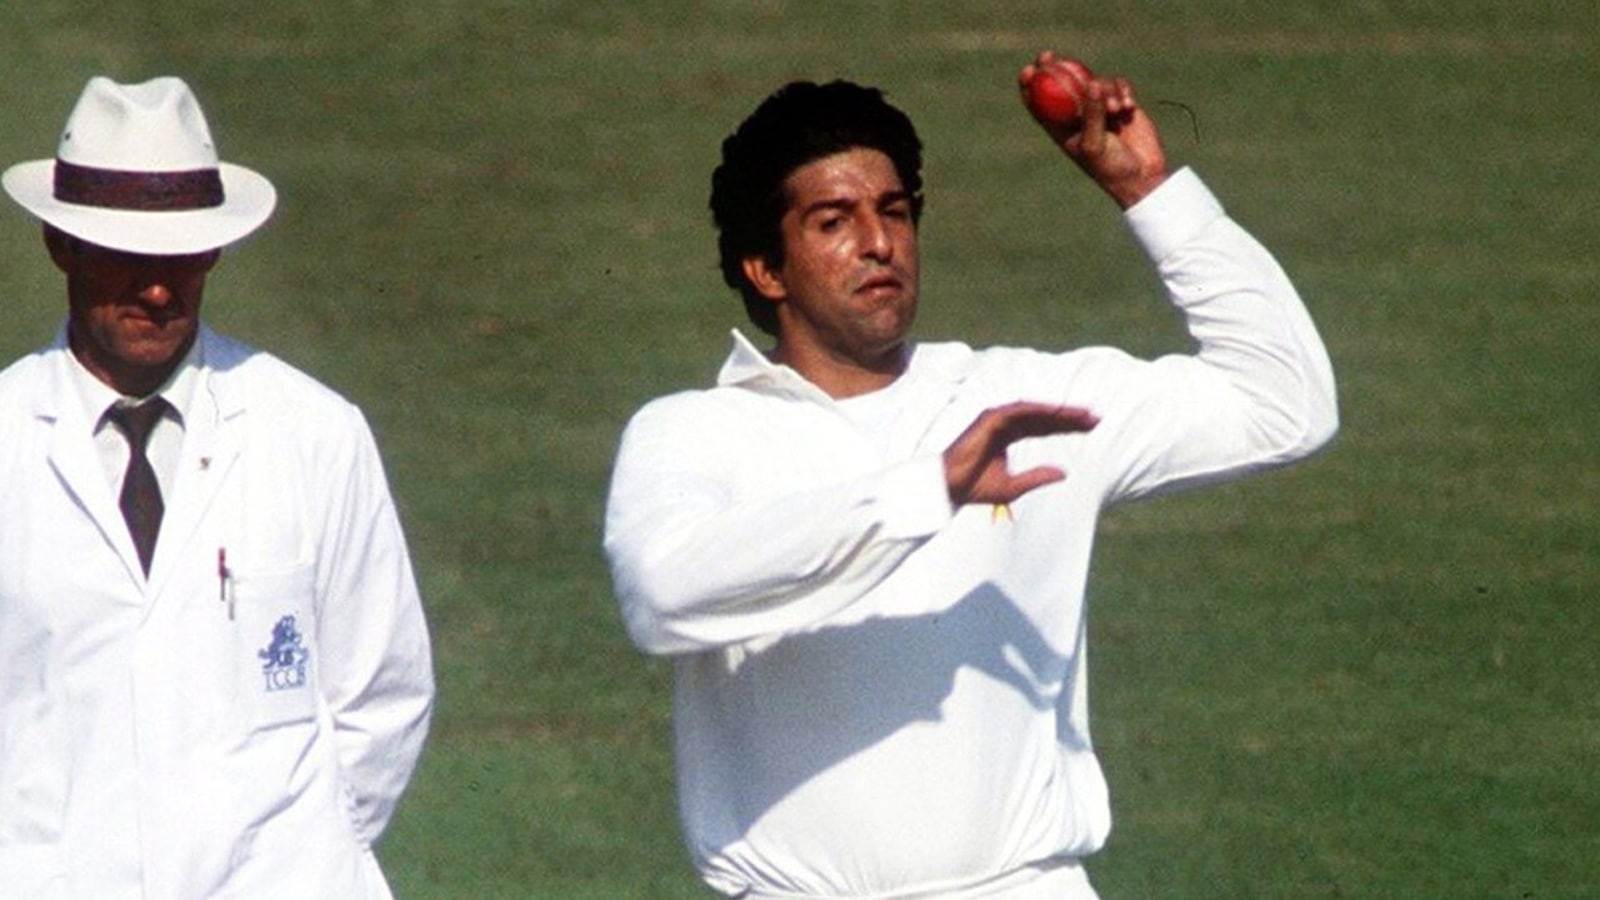 wasim-akram-reveals-he-bowled-leg-breaks-to-india-batters-in-1987-test-i-dismissed-srikkanth-and-amarnath-with-that